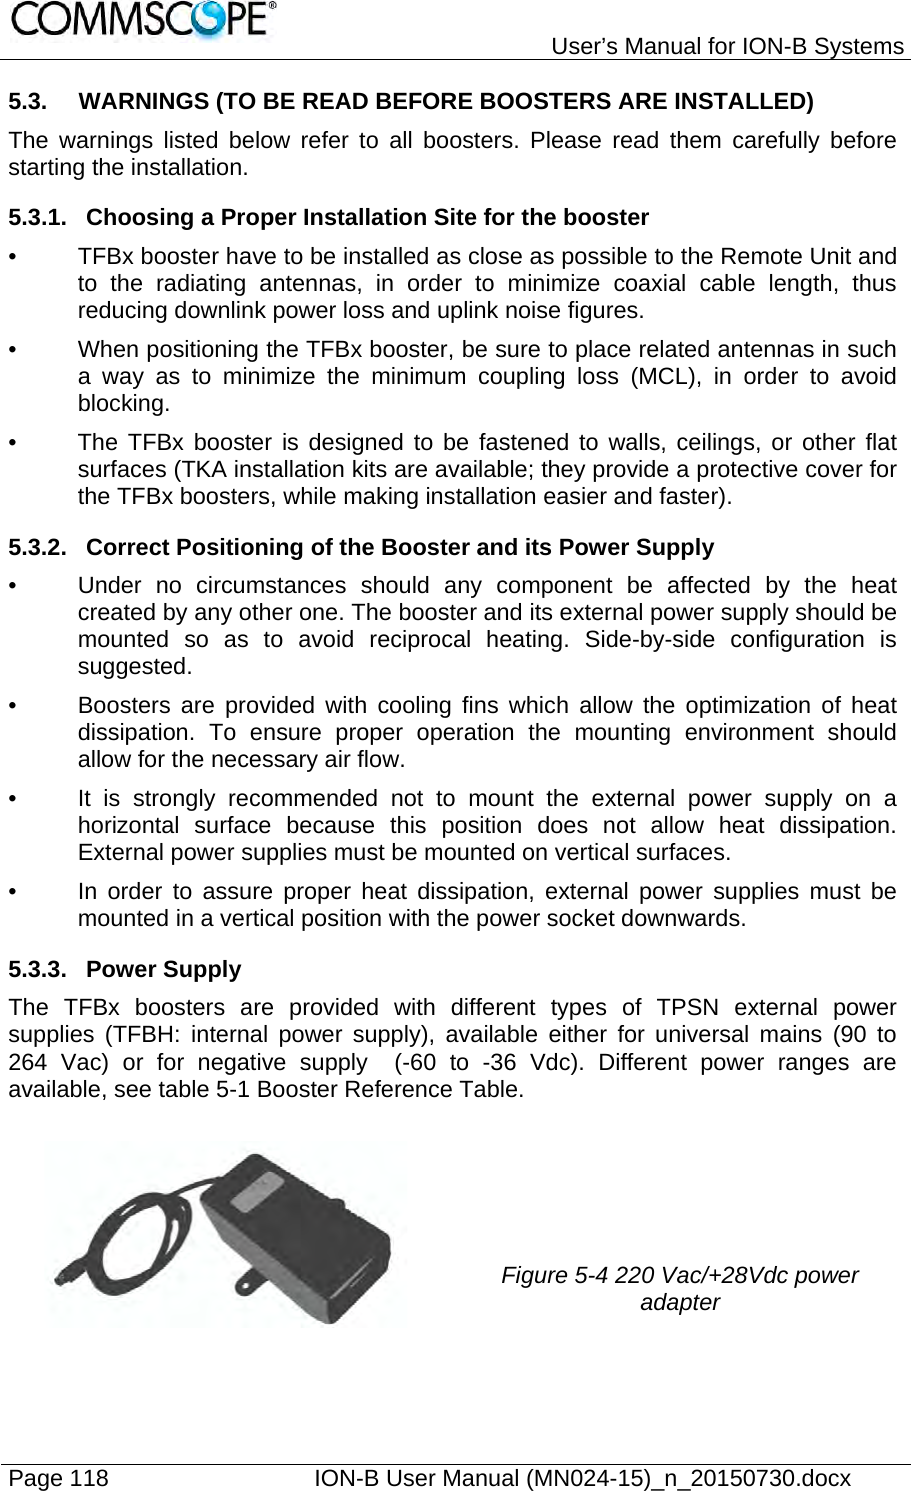   User’s Manual for ION-B Systems Page 118    ION-B User Manual (MN024-15)_n_20150730.docx  5.3.  WARNINGS (TO BE READ BEFORE BOOSTERS ARE INSTALLED) The warnings listed below refer to all boosters. Please read them carefully before starting the installation. 5.3.1.  Choosing a Proper Installation Site for the booster •  TFBx booster have to be installed as close as possible to the Remote Unit and to the radiating antennas, in order to minimize coaxial cable length, thus reducing downlink power loss and uplink noise figures. •  When positioning the TFBx booster, be sure to place related antennas in such a way as to minimize the minimum coupling loss (MCL), in order to avoid blocking. •  The TFBx booster is designed to be fastened to walls, ceilings, or other flat surfaces (TKA installation kits are available; they provide a protective cover for the TFBx boosters, while making installation easier and faster). 5.3.2.  Correct Positioning of the Booster and its Power Supply •  Under no circumstances should any component be affected by the heat created by any other one. The booster and its external power supply should be mounted so as to avoid reciprocal heating. Side-by-side configuration is suggested. •  Boosters are provided with cooling fins which allow the optimization of heat dissipation. To ensure proper operation the mounting environment should allow for the necessary air flow. •  It is strongly recommended not to mount the external power supply on a horizontal surface because this position does not allow heat dissipation. External power supplies must be mounted on vertical surfaces. •  In order to assure proper heat dissipation, external power supplies must be mounted in a vertical position with the power socket downwards. 5.3.3. Power Supply The TFBx boosters are provided with different types of TPSN external power supplies (TFBH: internal power supply), available either for universal mains (90 to 264 Vac) or for negative supply  (-60 to -36 Vdc). Different power ranges are available, see table 5-1 Booster Reference Table.  Figure 5-4 220 Vac/+28Vdc power adapter  